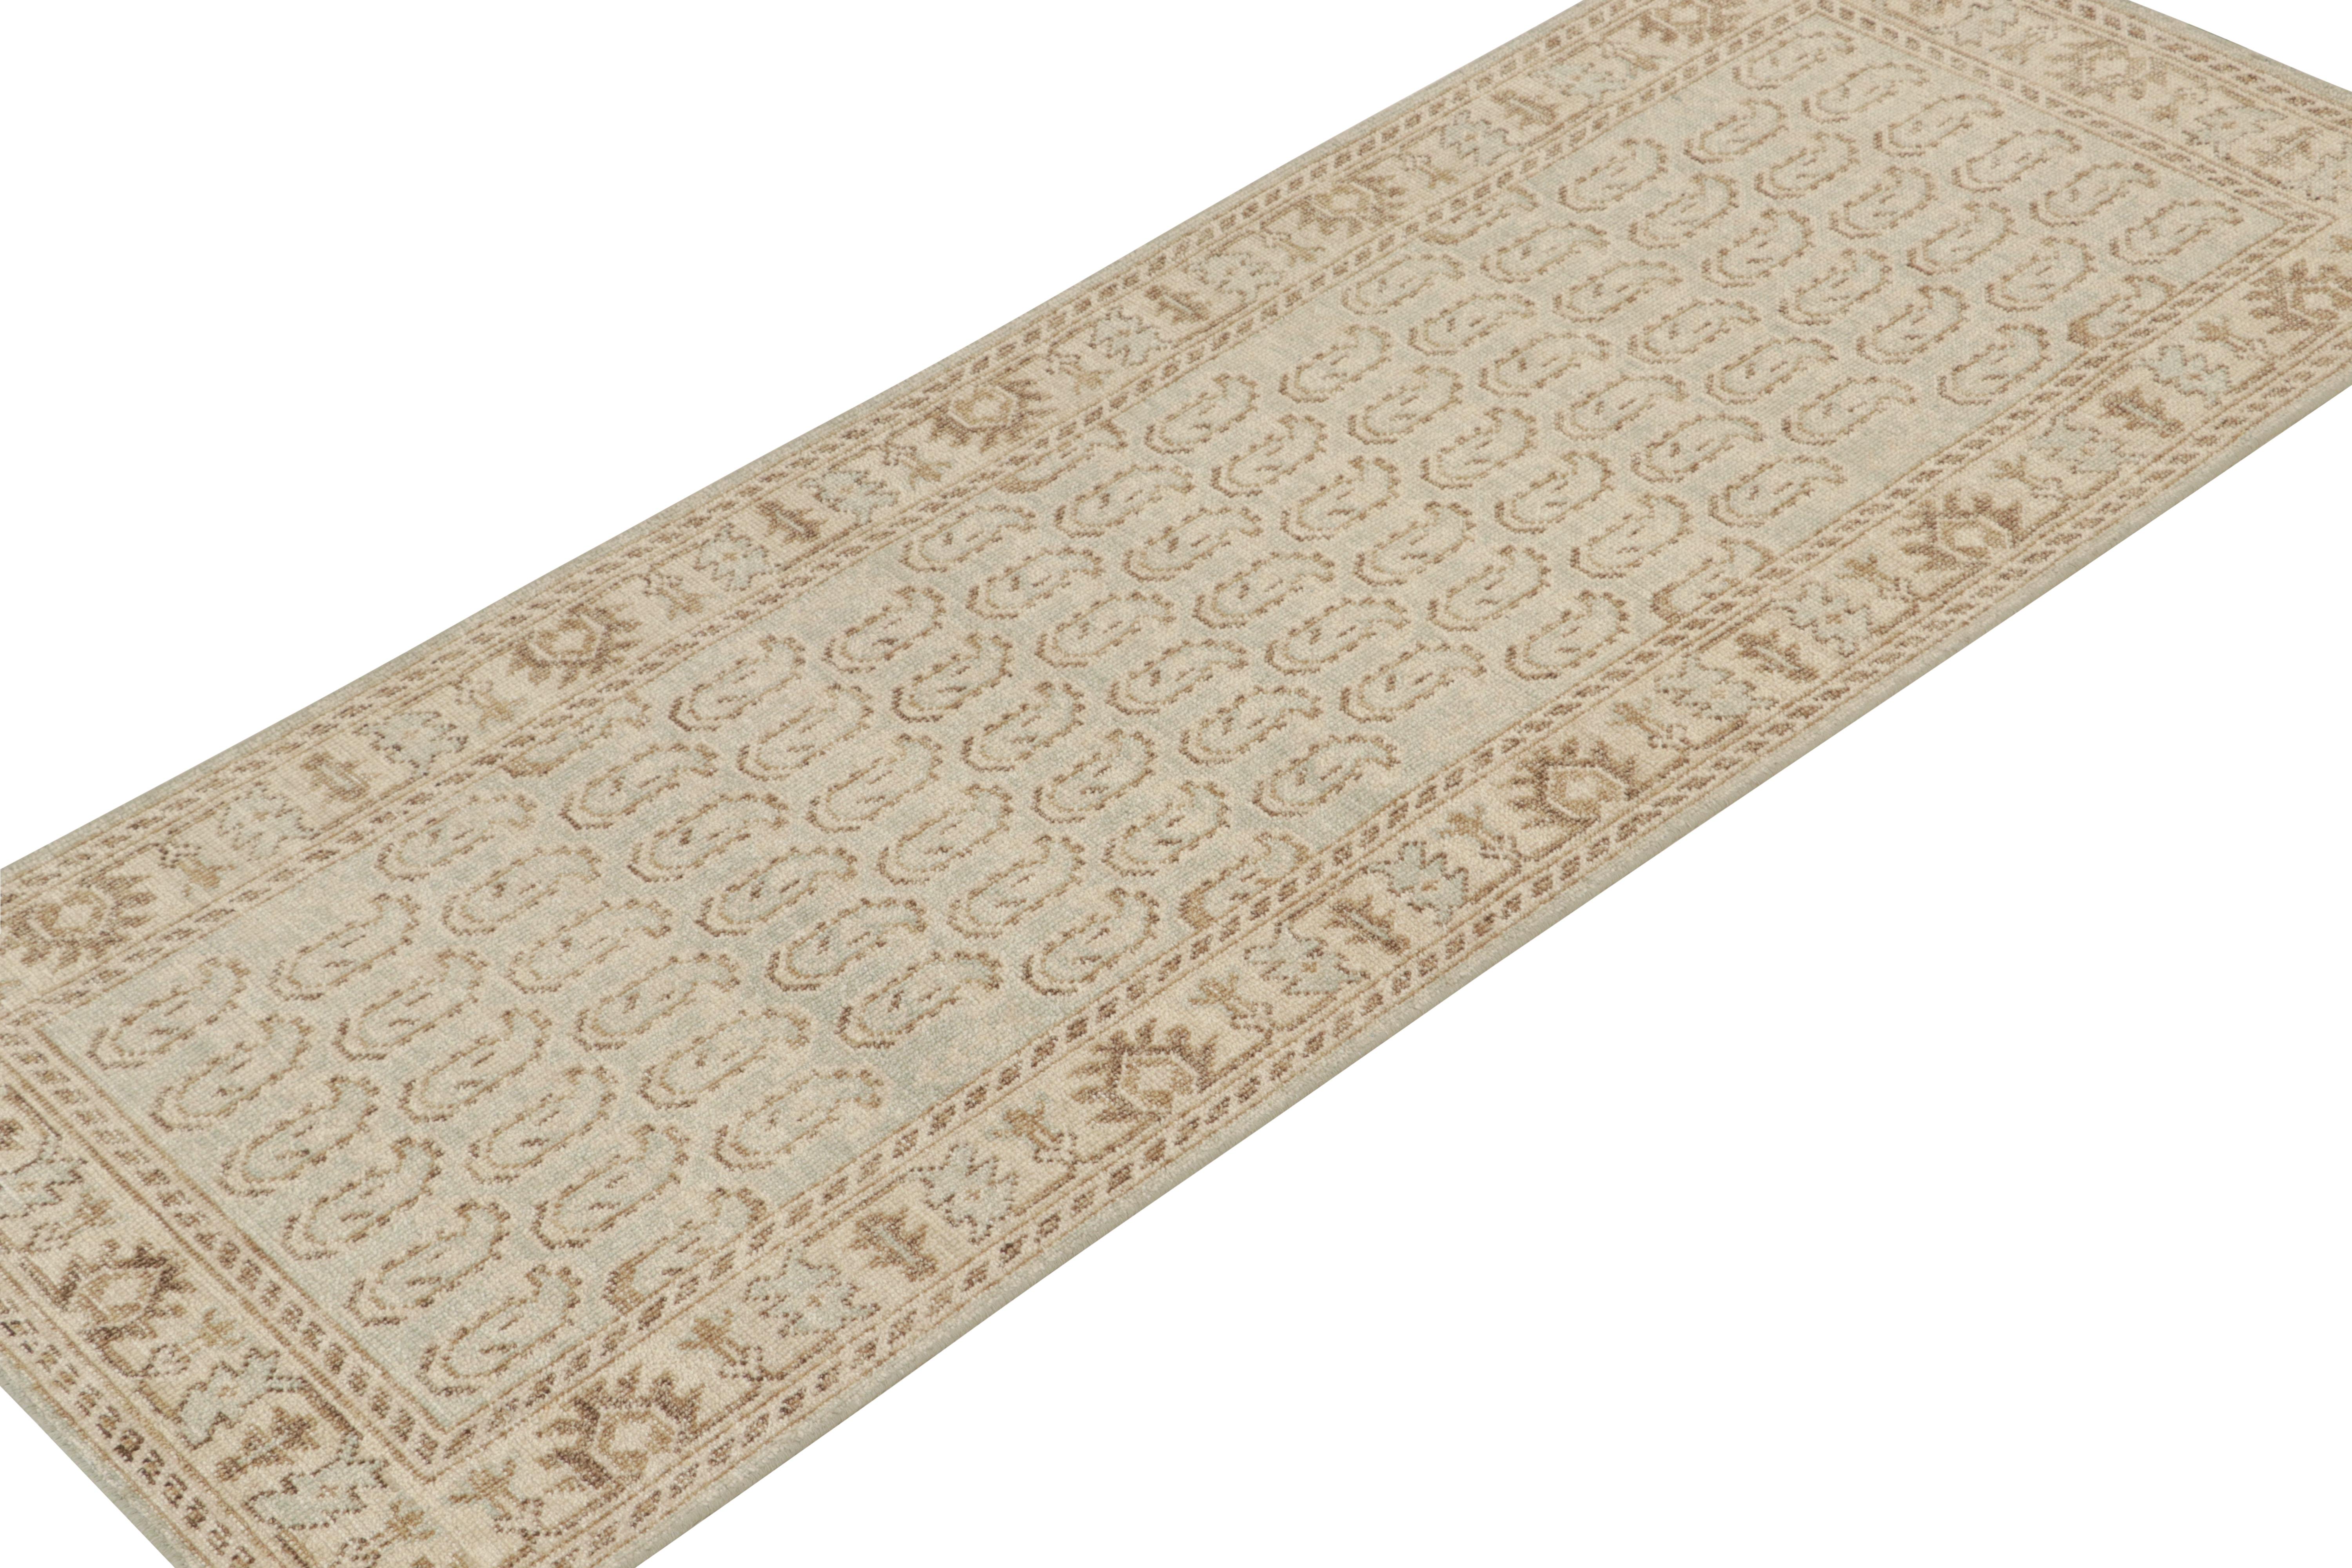 This 4x8 gallery runner is a new addition to Rug & Kilim's Homage Collection. Hand-knotted in wool and cotton, it recaptures caucasian tribal patterns in soft colors and approachable demeanor.

Further on the Design:

This particular rug enjoys